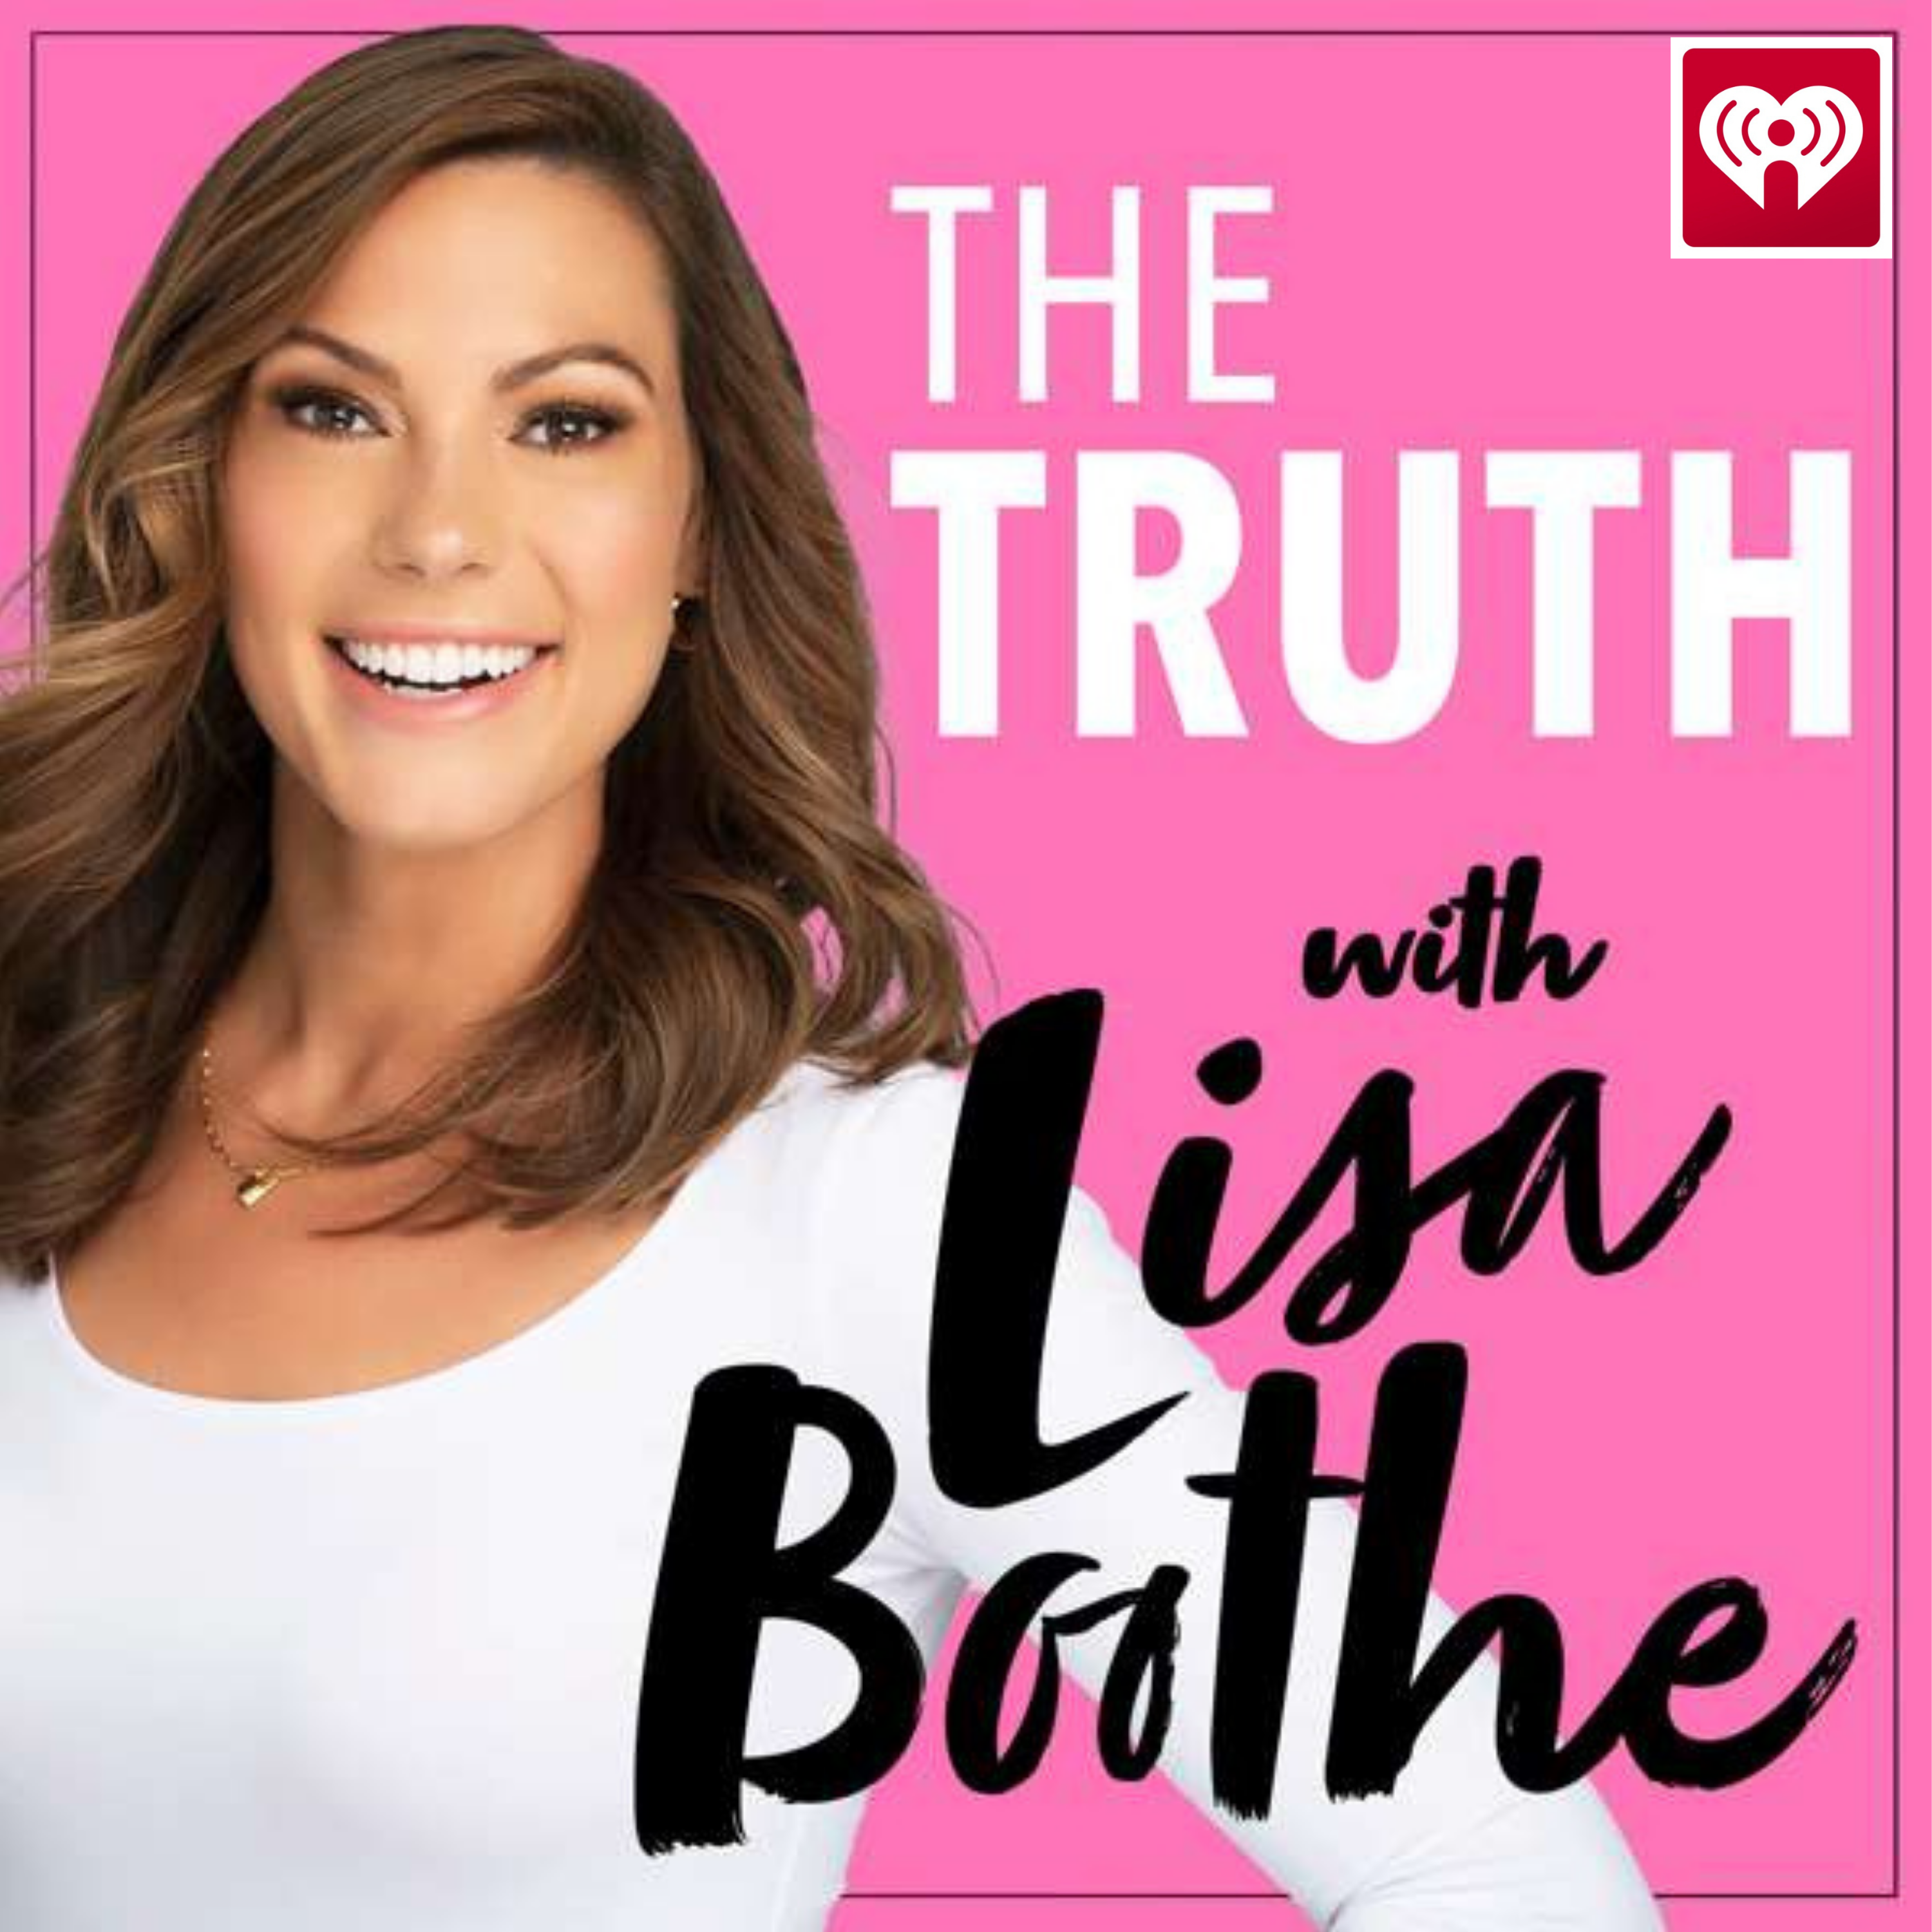 The Truth with Lisa Boothe: A Parent's Story with Erin Friday